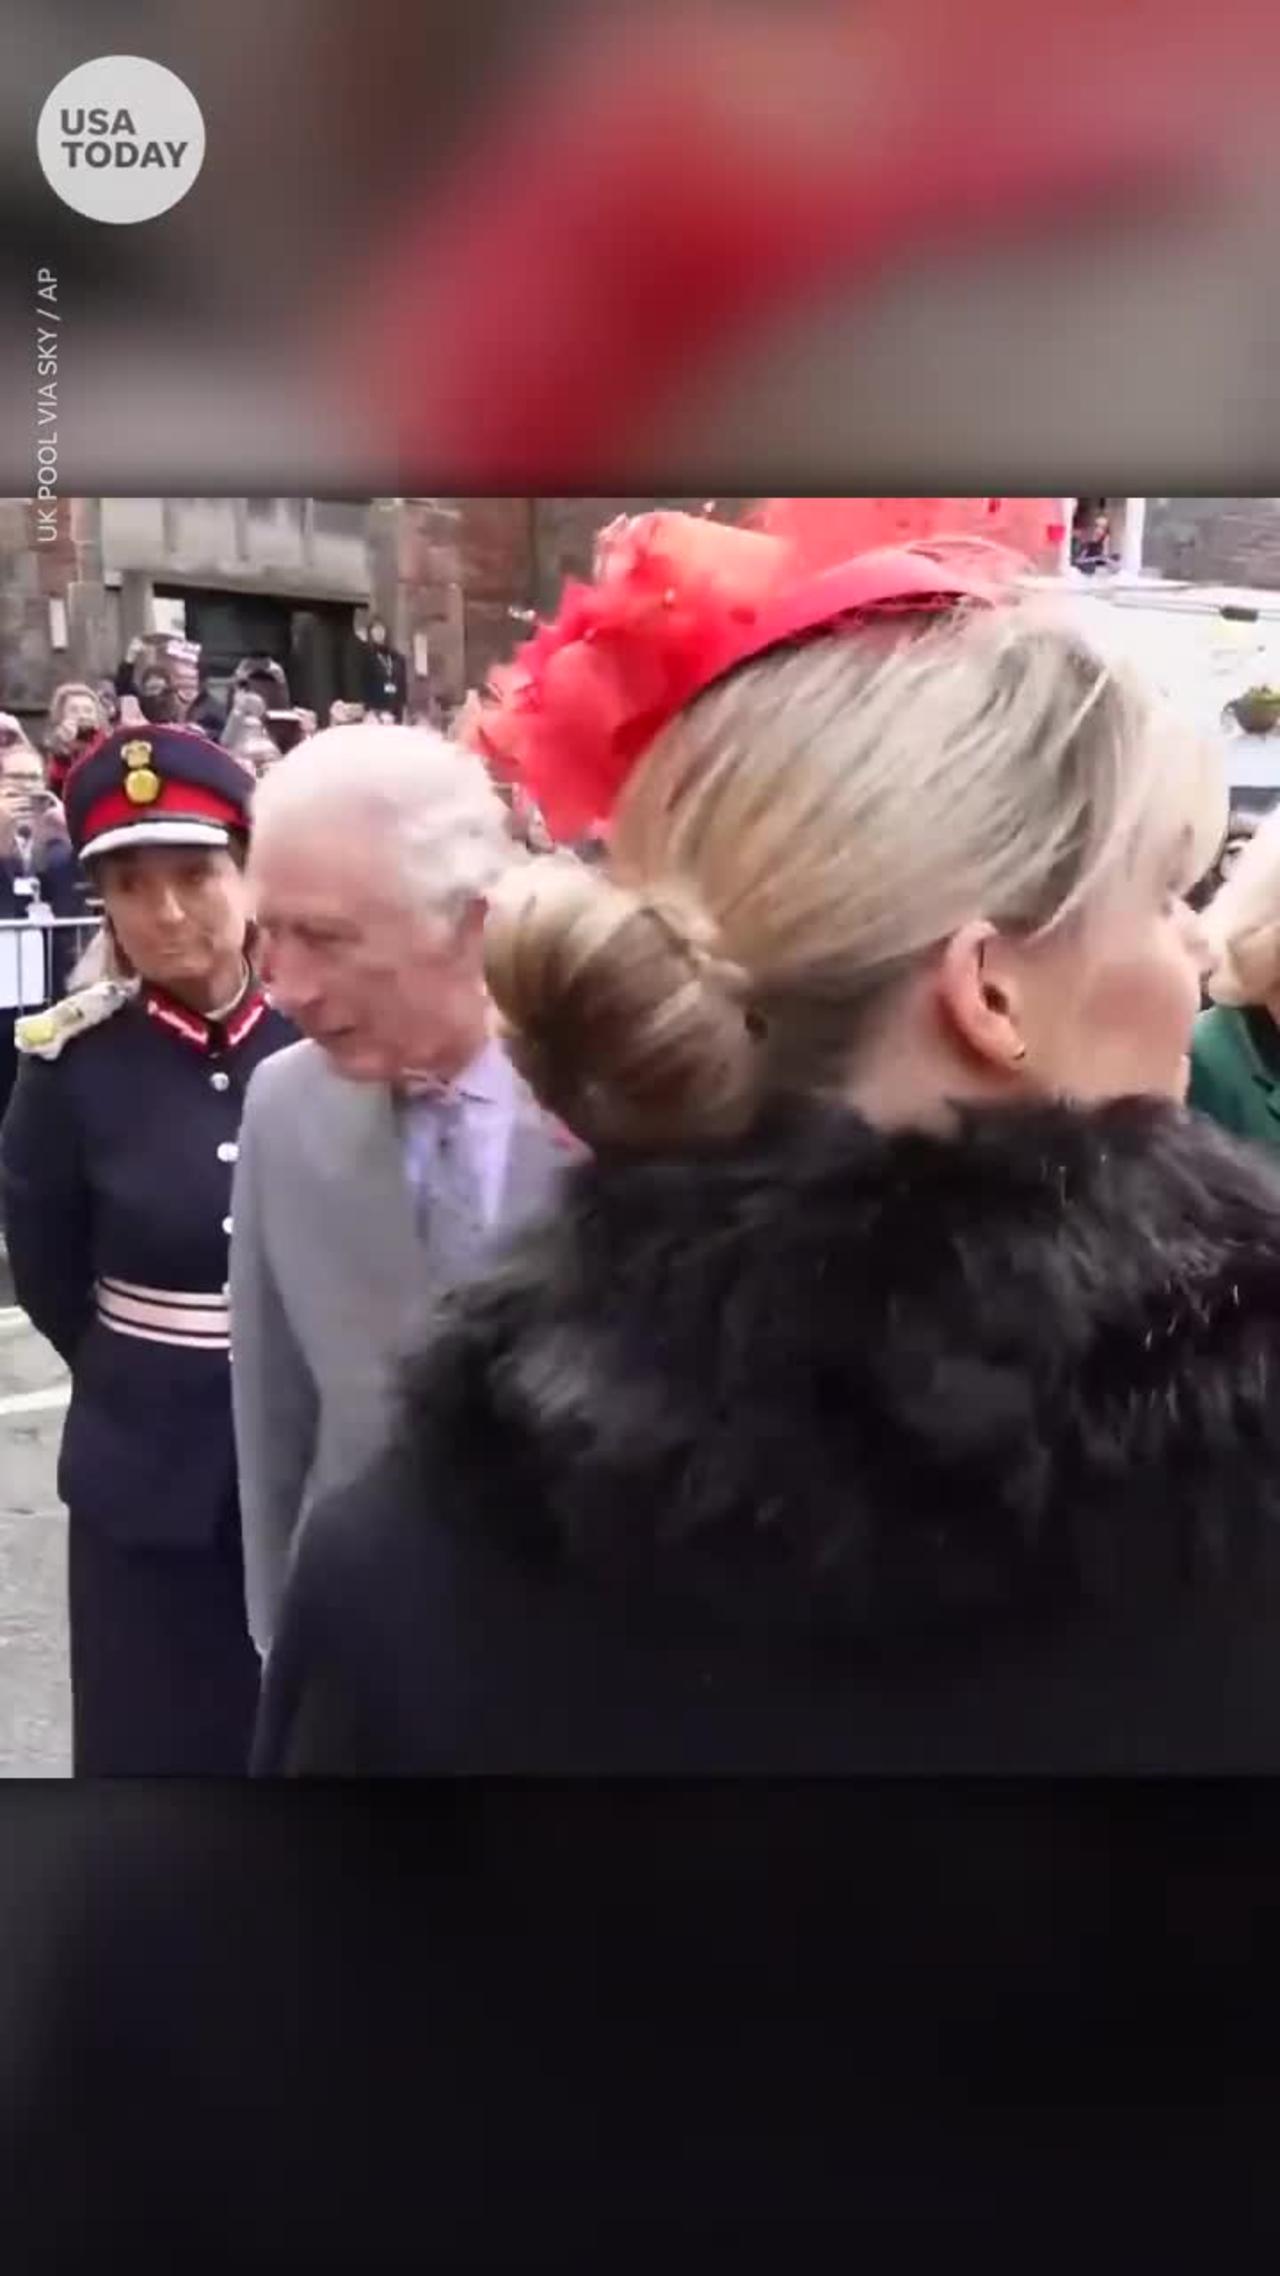 Man throws eggs at King Charles III and Queen Consort Camilla | USA TODAY #Shorts